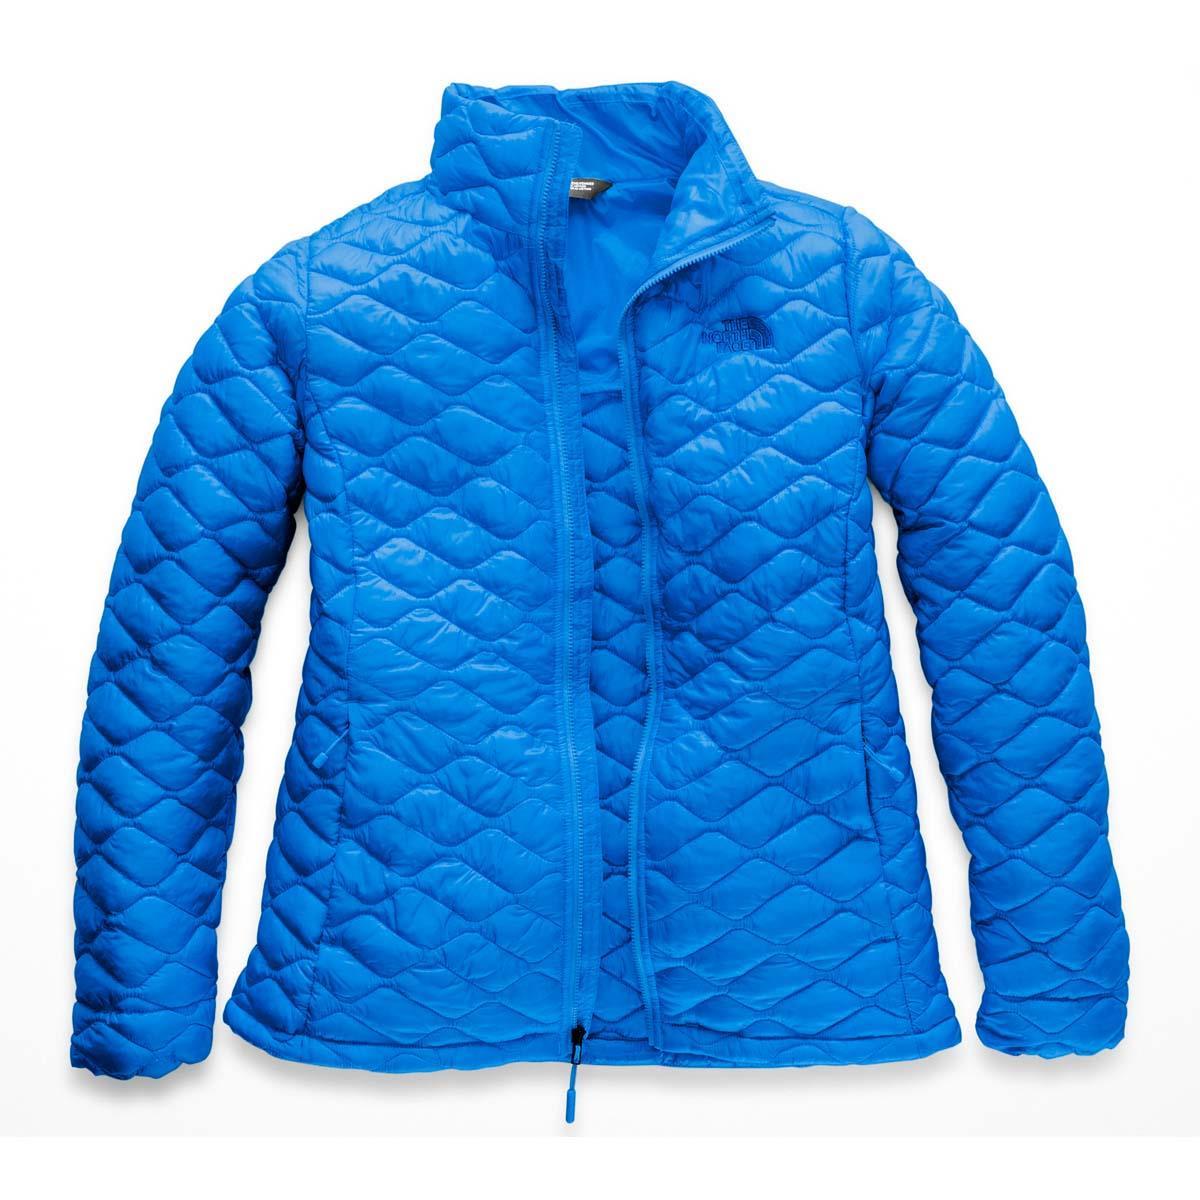 women's north face thermoball